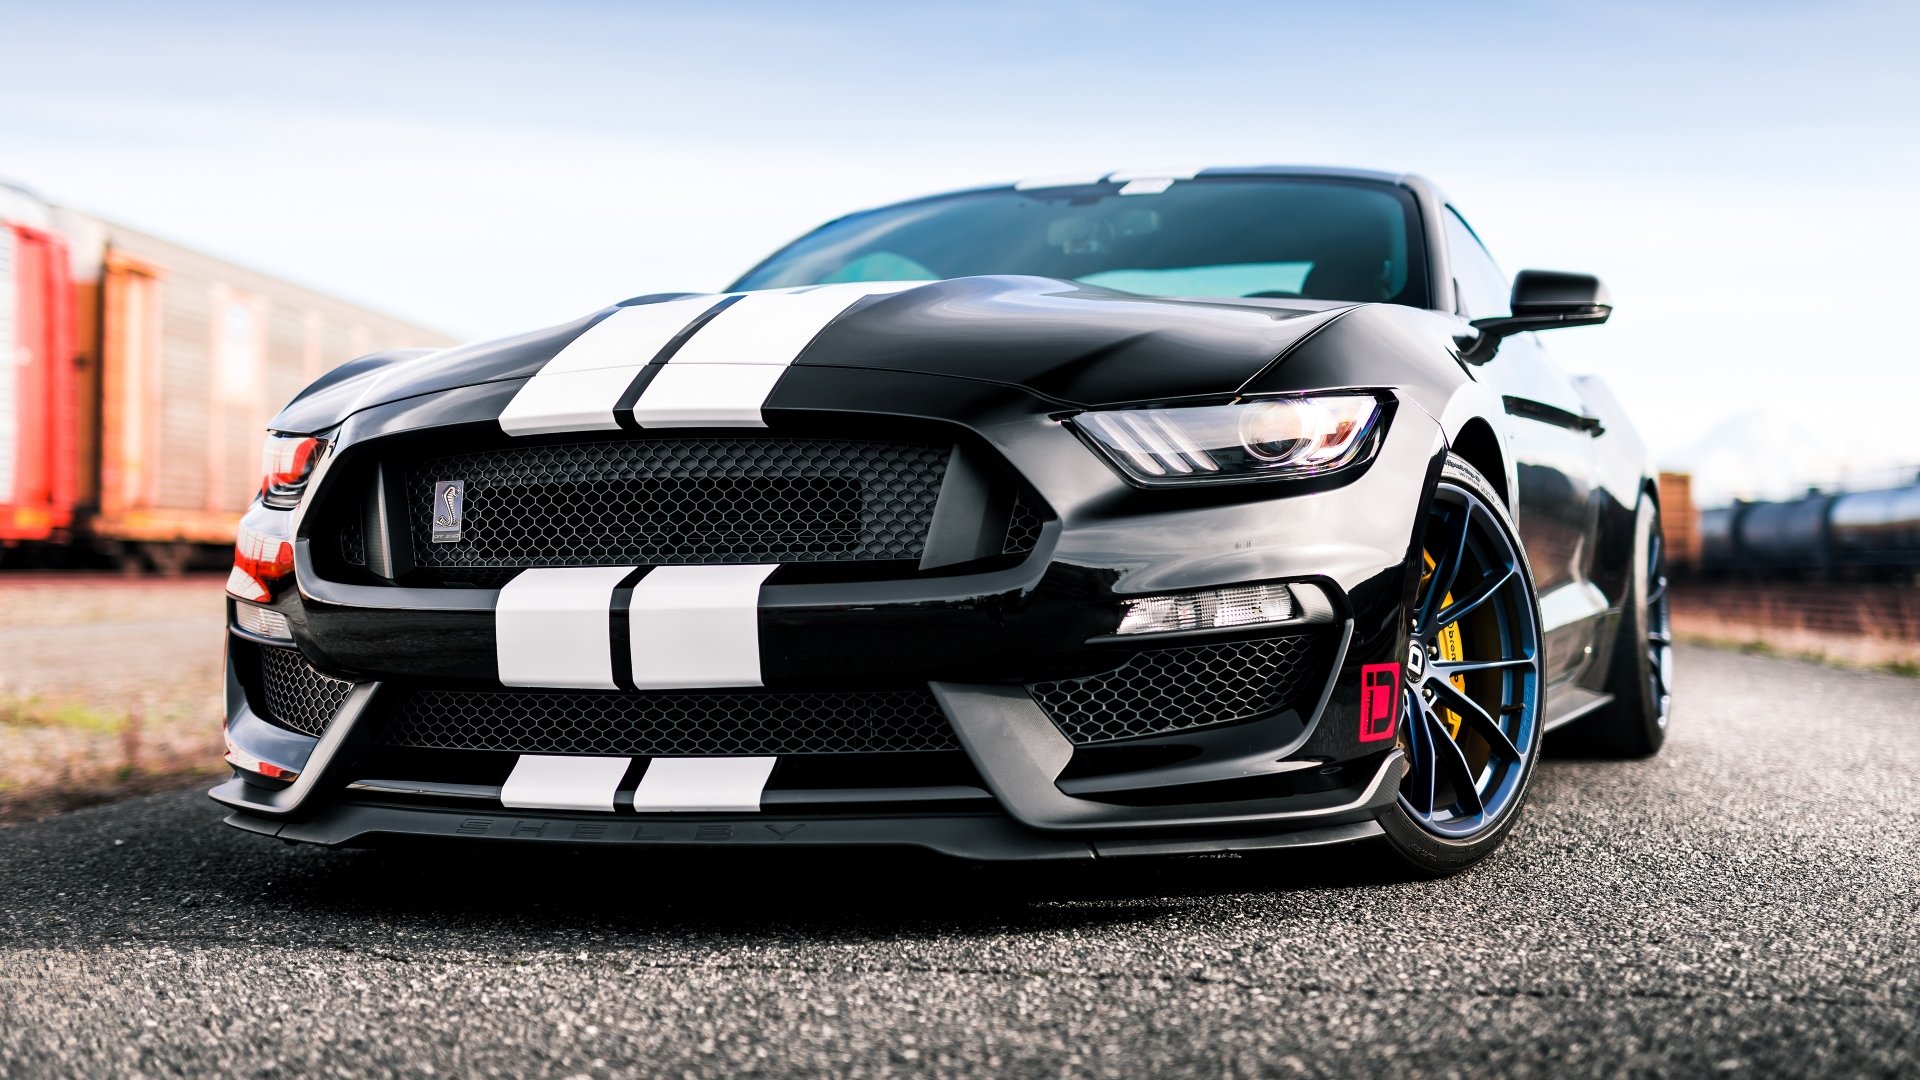 Ford Mustang Shelby GT350 4k Ultra HD Wallpaper Background Image 77184 ...